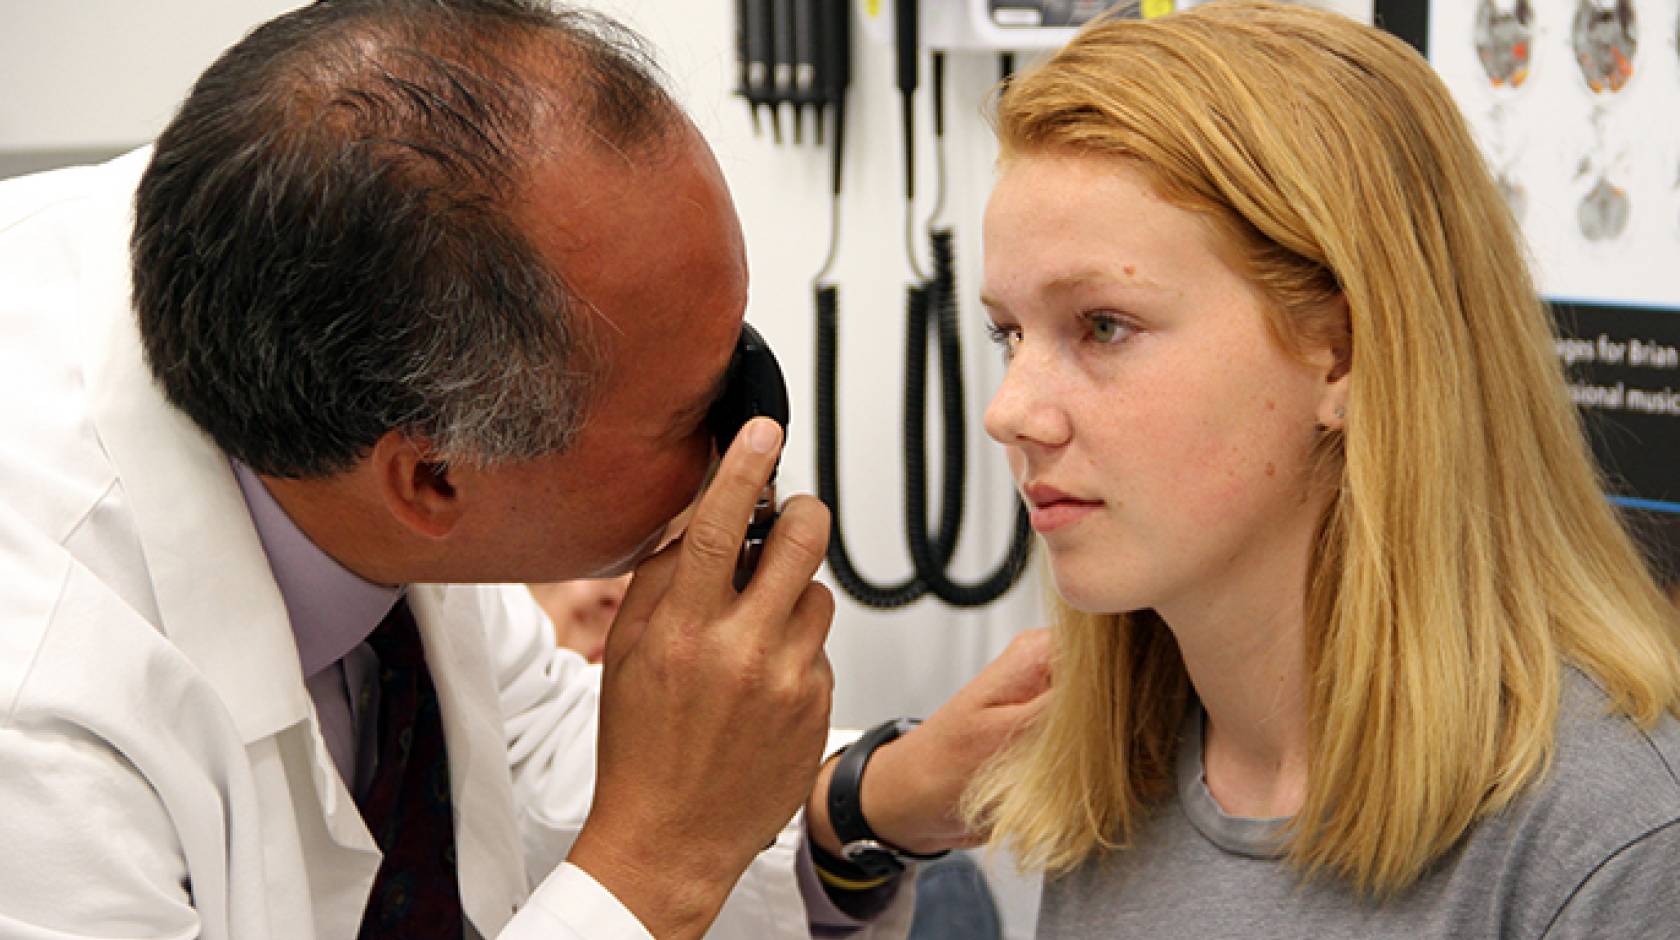 Dr. Christopher Giza examines Kennedy Dierk, 14, at the UCLA Steve Tisch BrainSport Clinic. A new survey shows most parents rely on outdated advice when caring for kids with concussions.